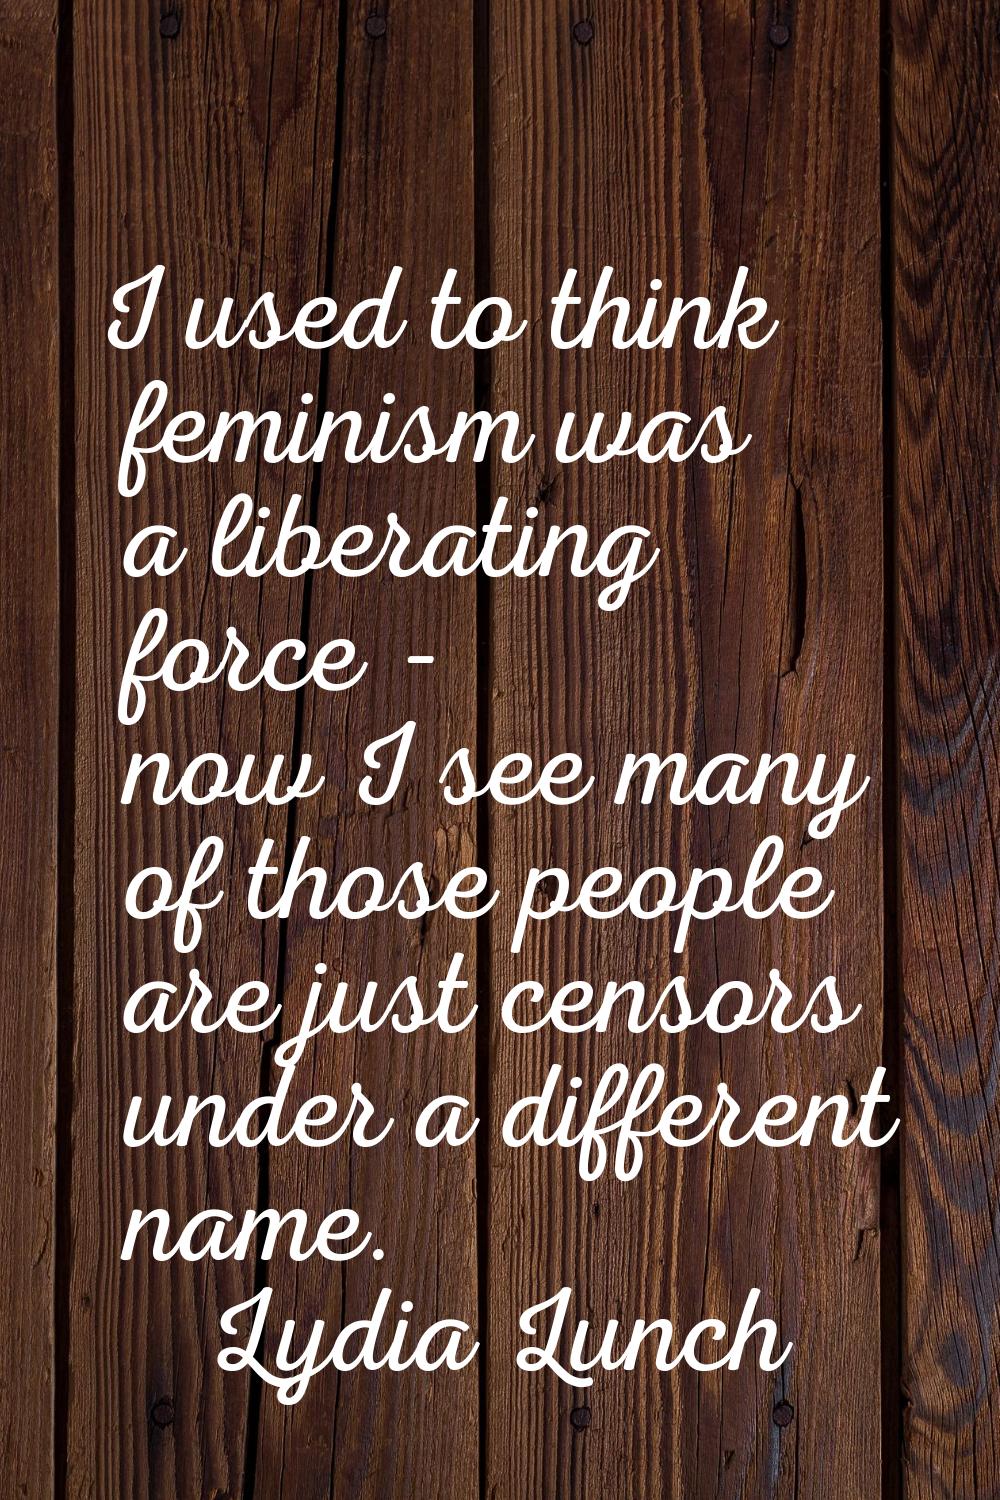 I used to think feminism was a liberating force - now I see many of those people are just censors u